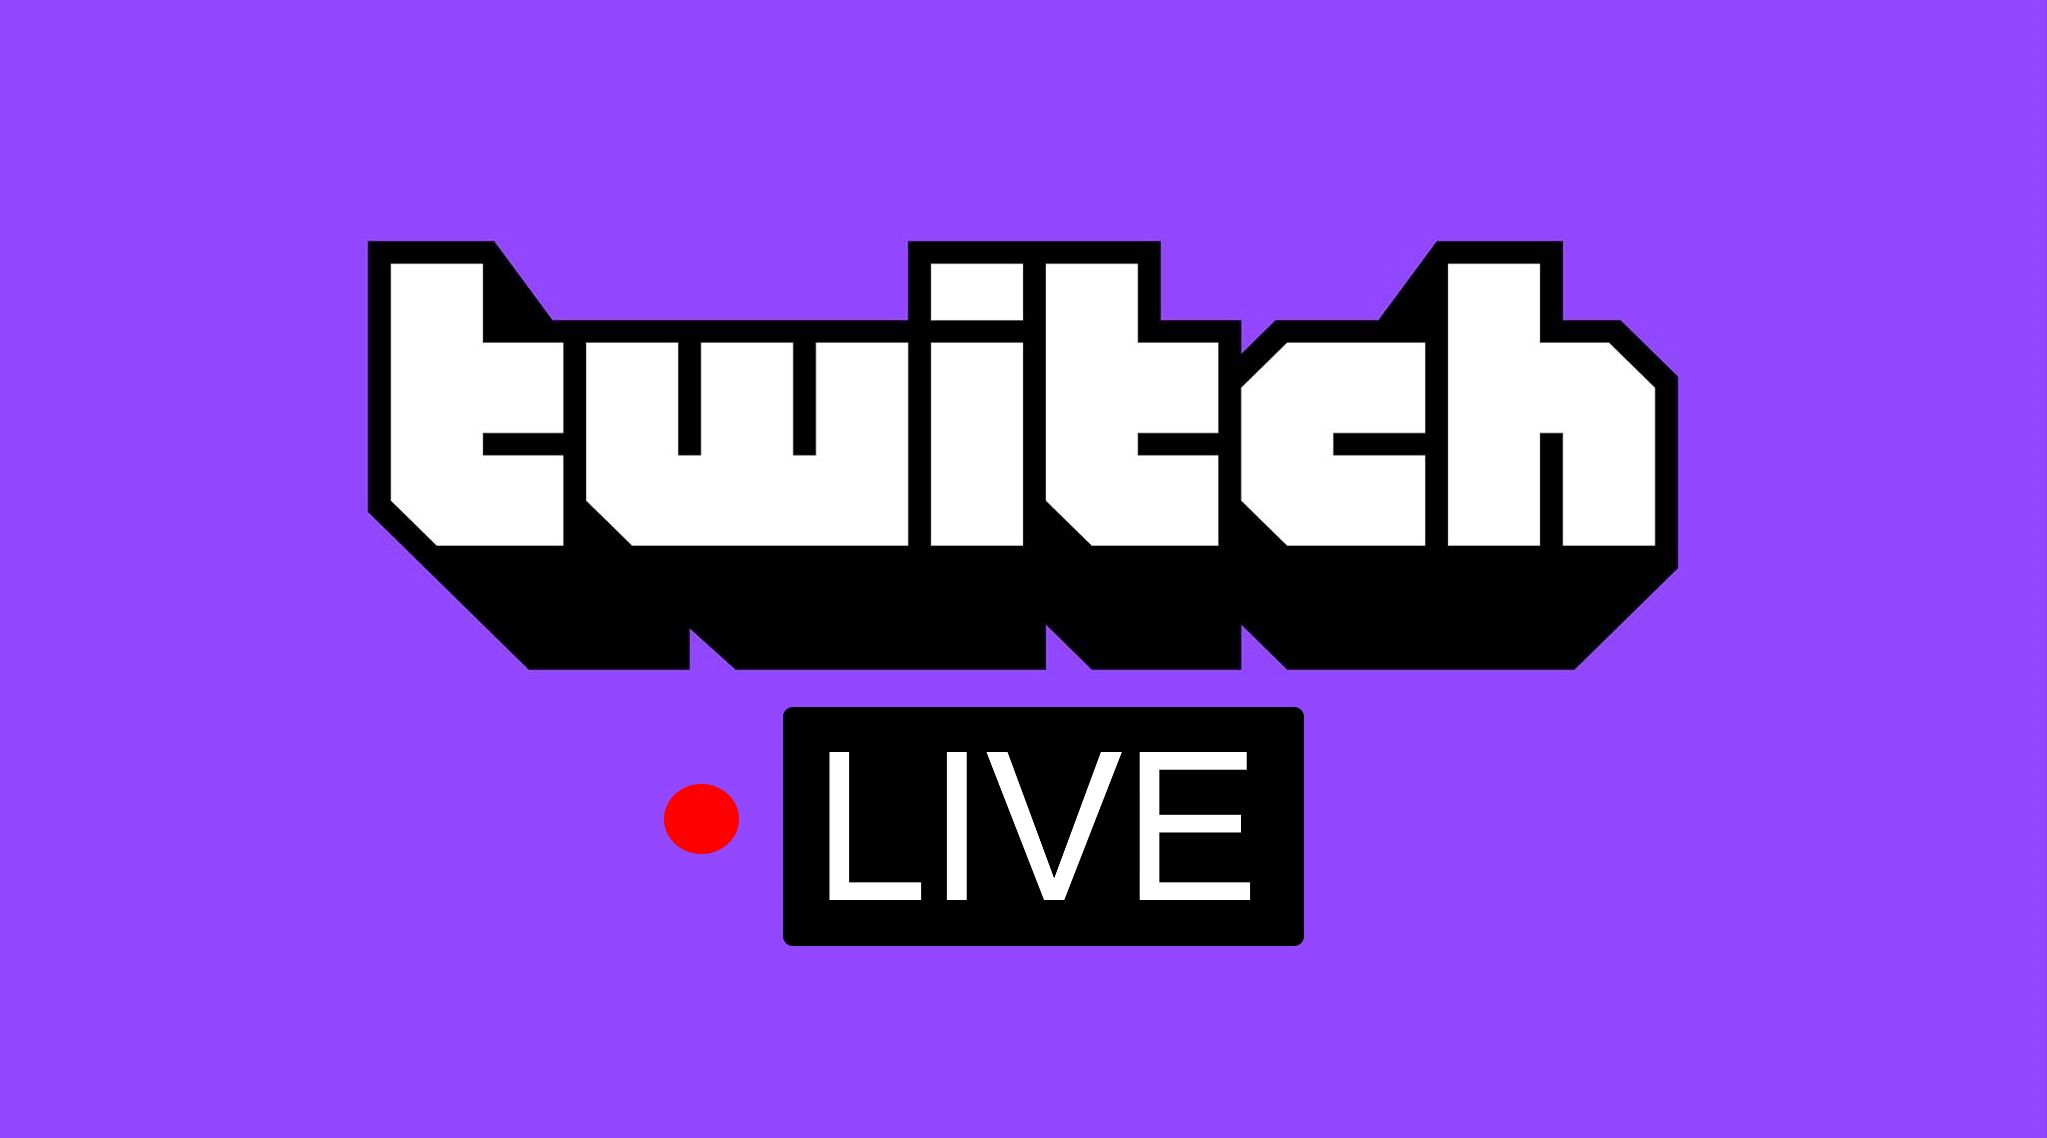 I officially have TWITCH now so I'll be streaming live to some